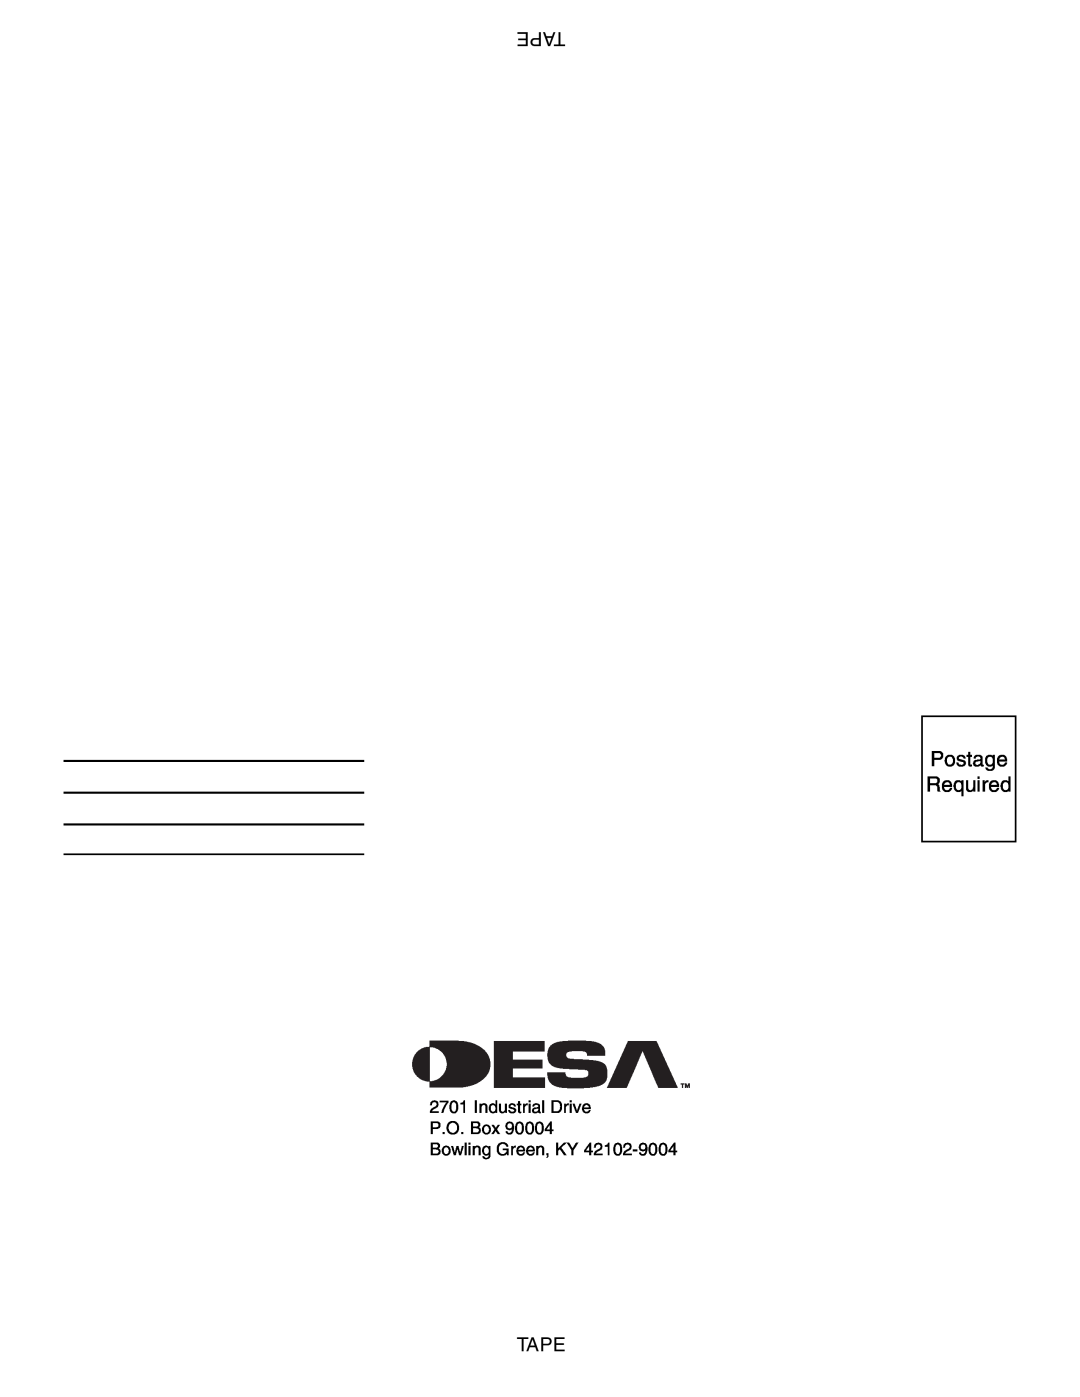 Desa (V)T36EPA SERIES, (V)T36ENA SERIES, (V)T36ENA SERIES, (V)T36EPA SERIES Postage Required, Tape, 111251-01D 